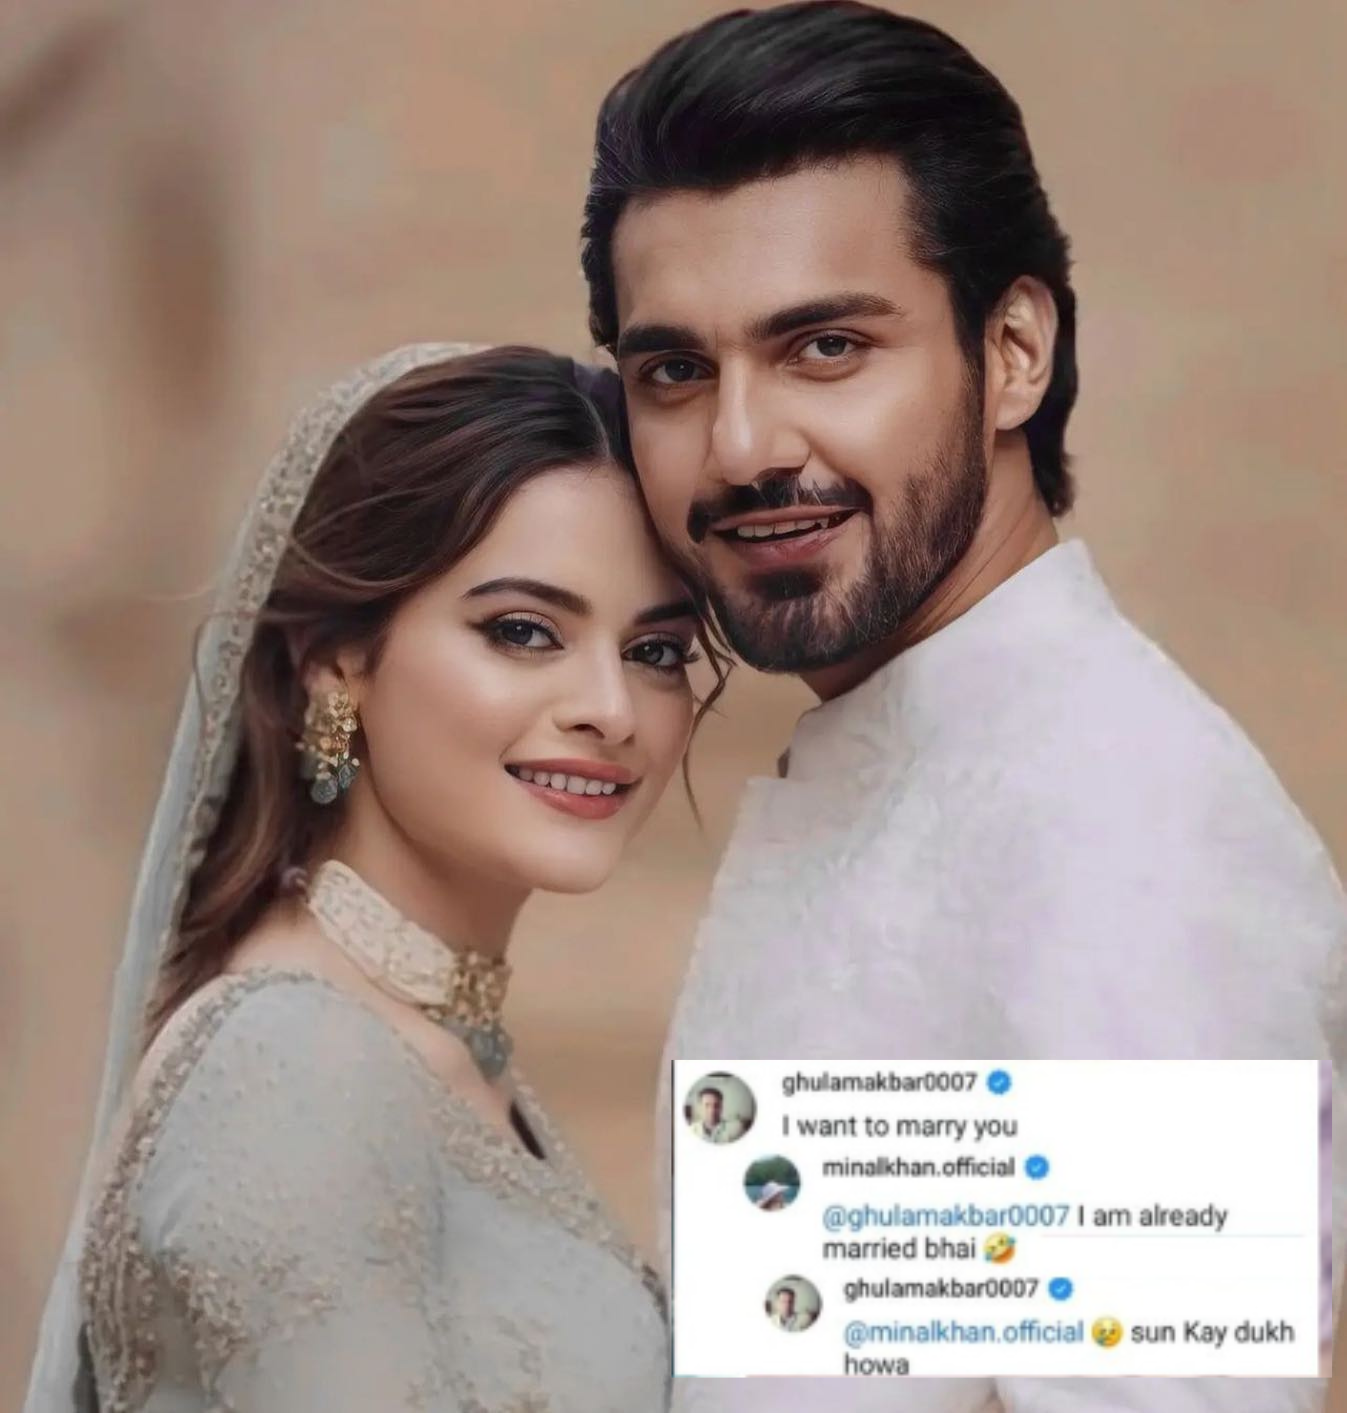 A fan proposed marriage to the married Manal Khan